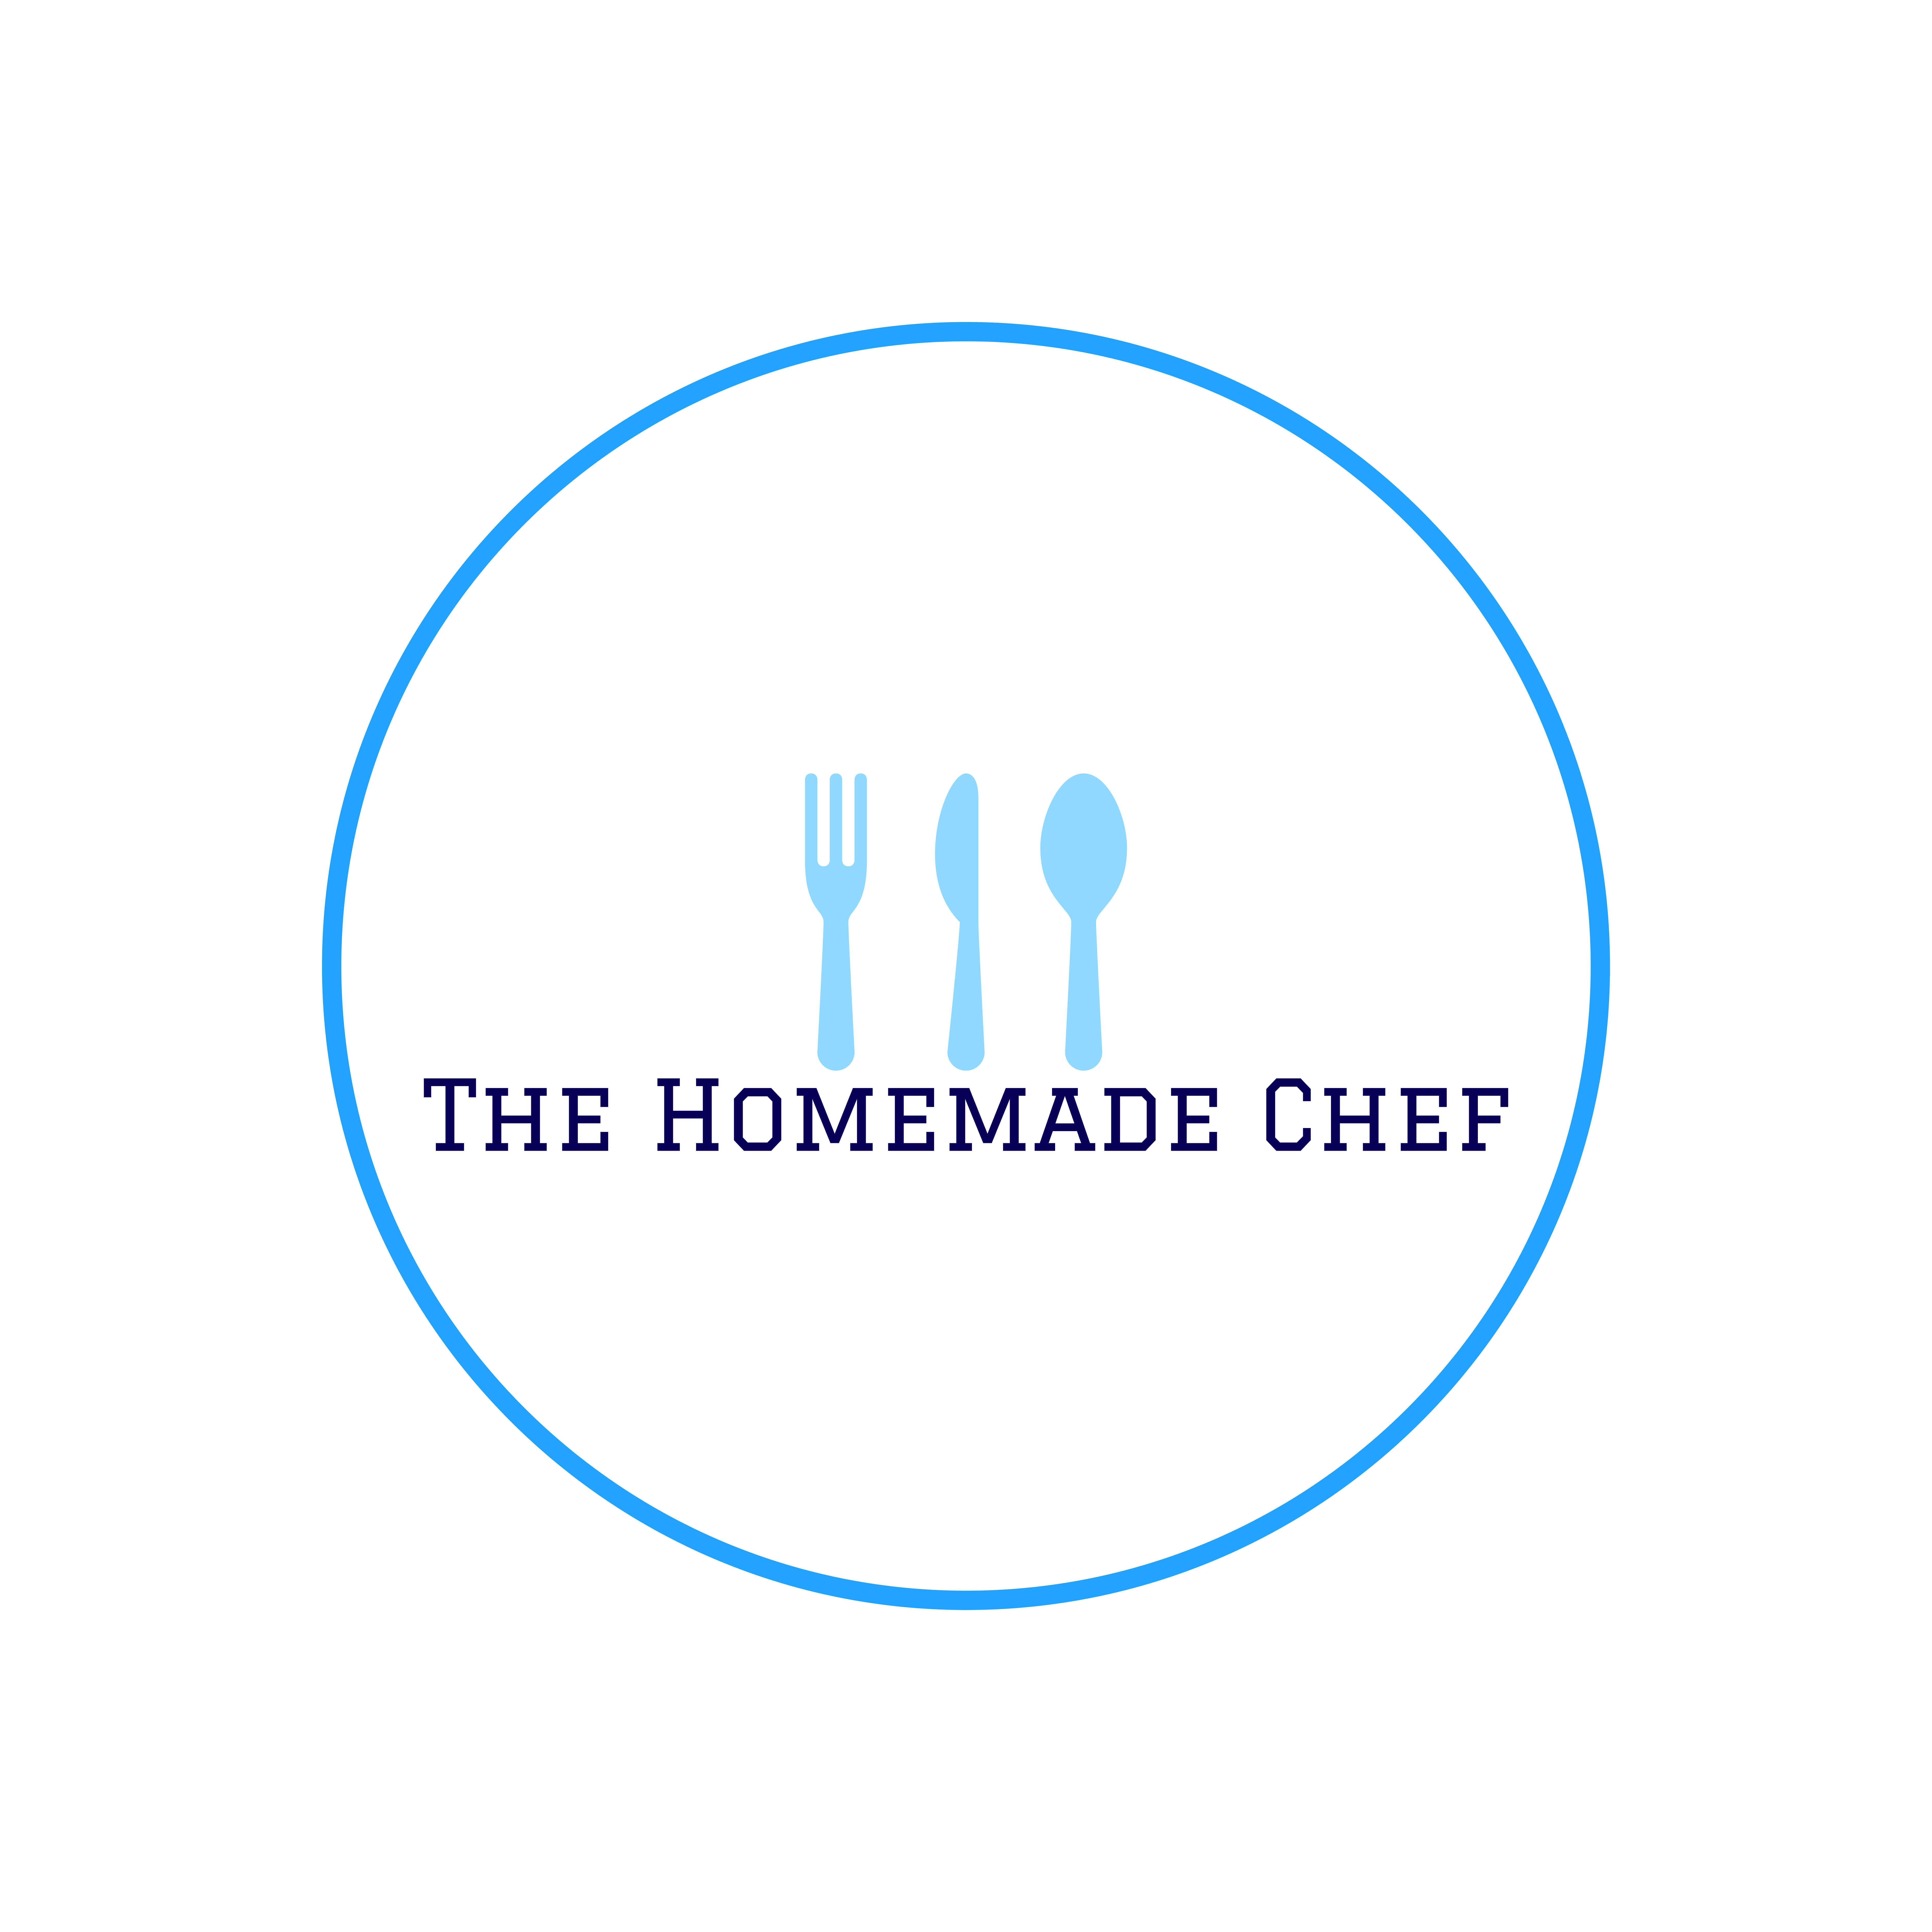 The Homemade Chef